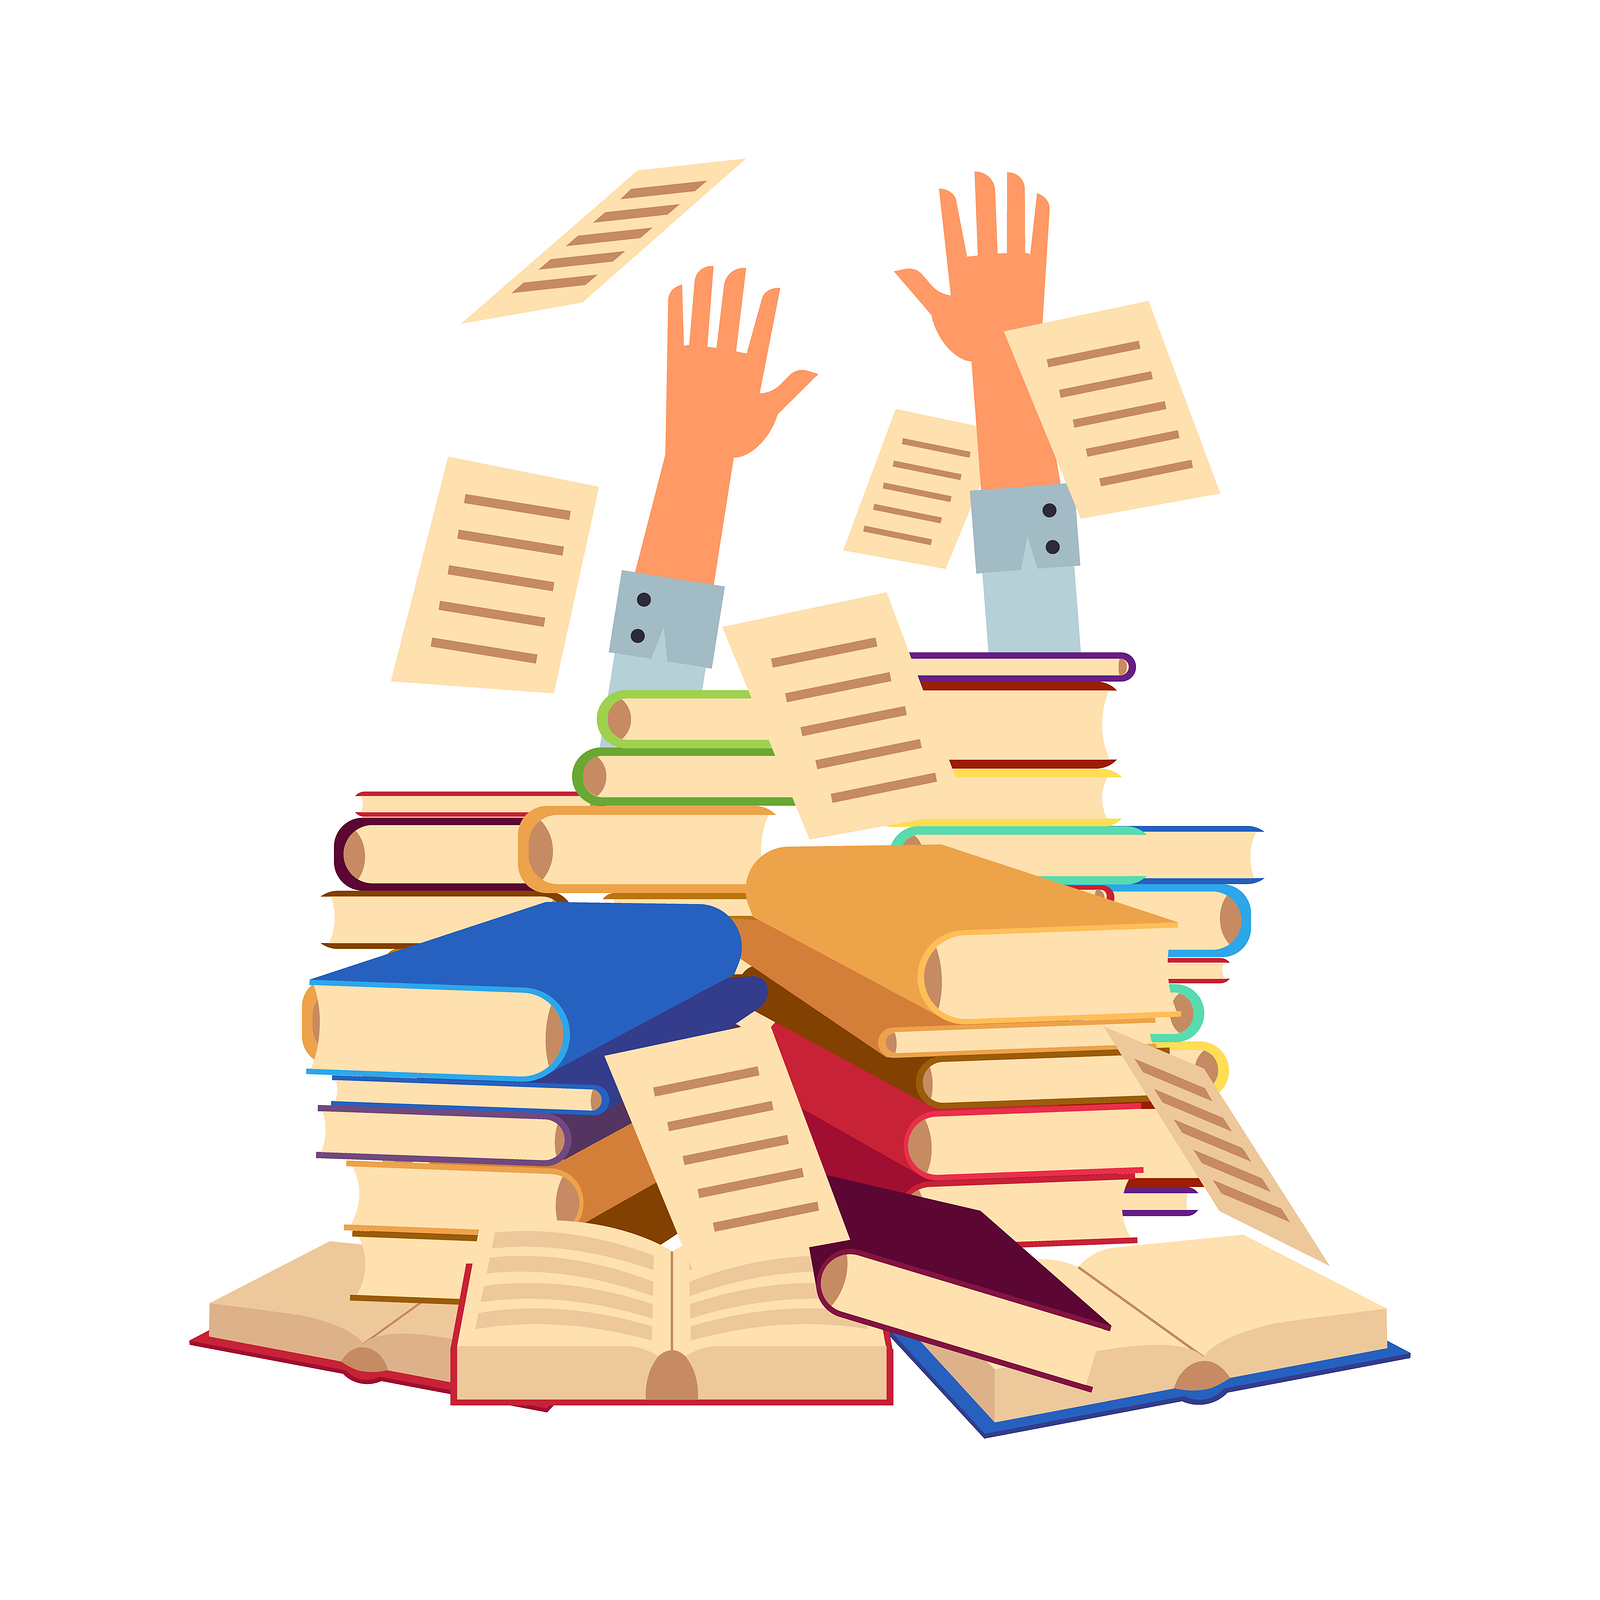 Hands Sticking Out from under pile of Books